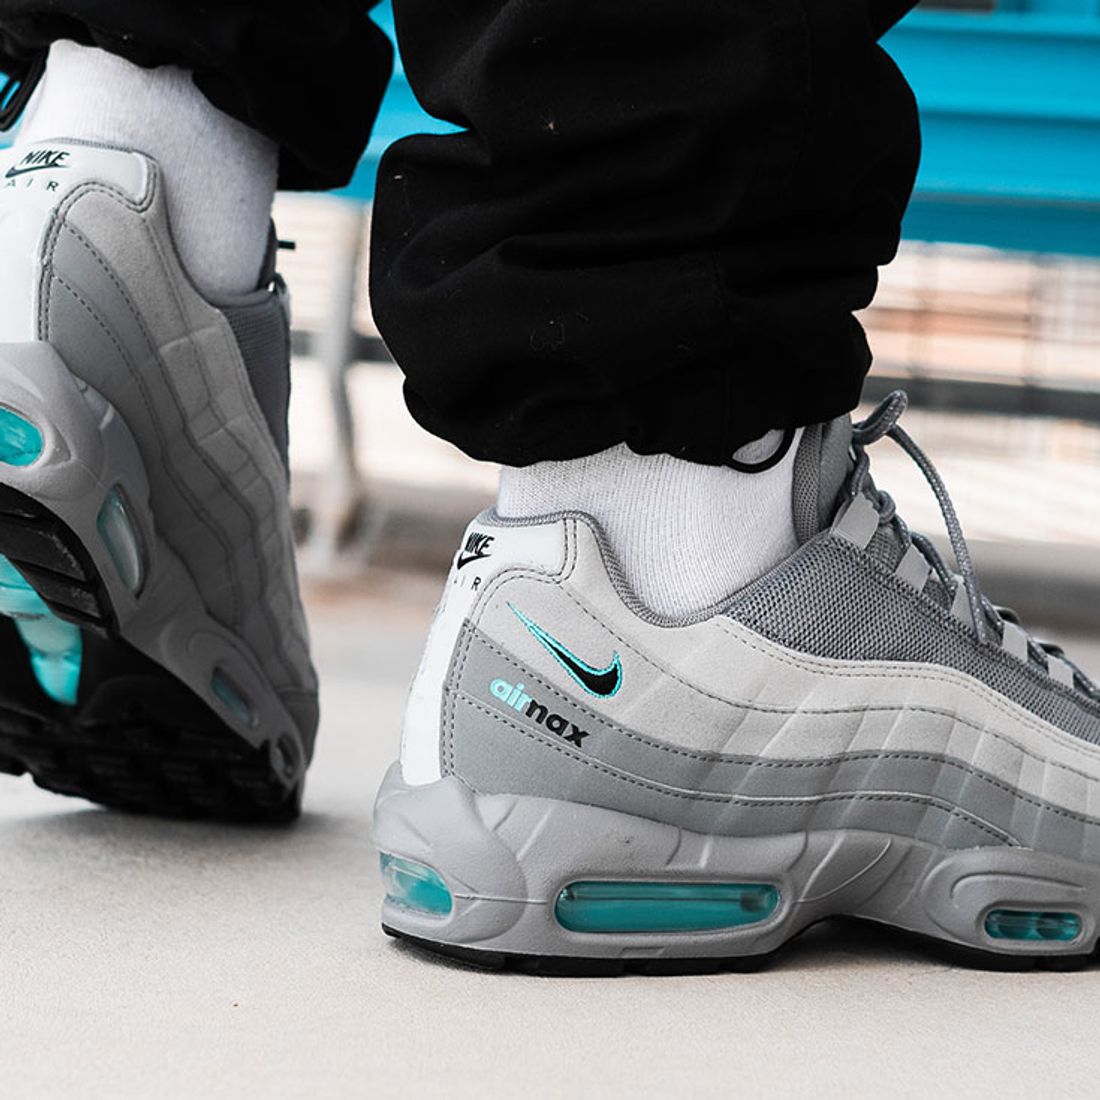 Sports-Exclusive Nike Air Max 95s Just Like the Days - Freaker